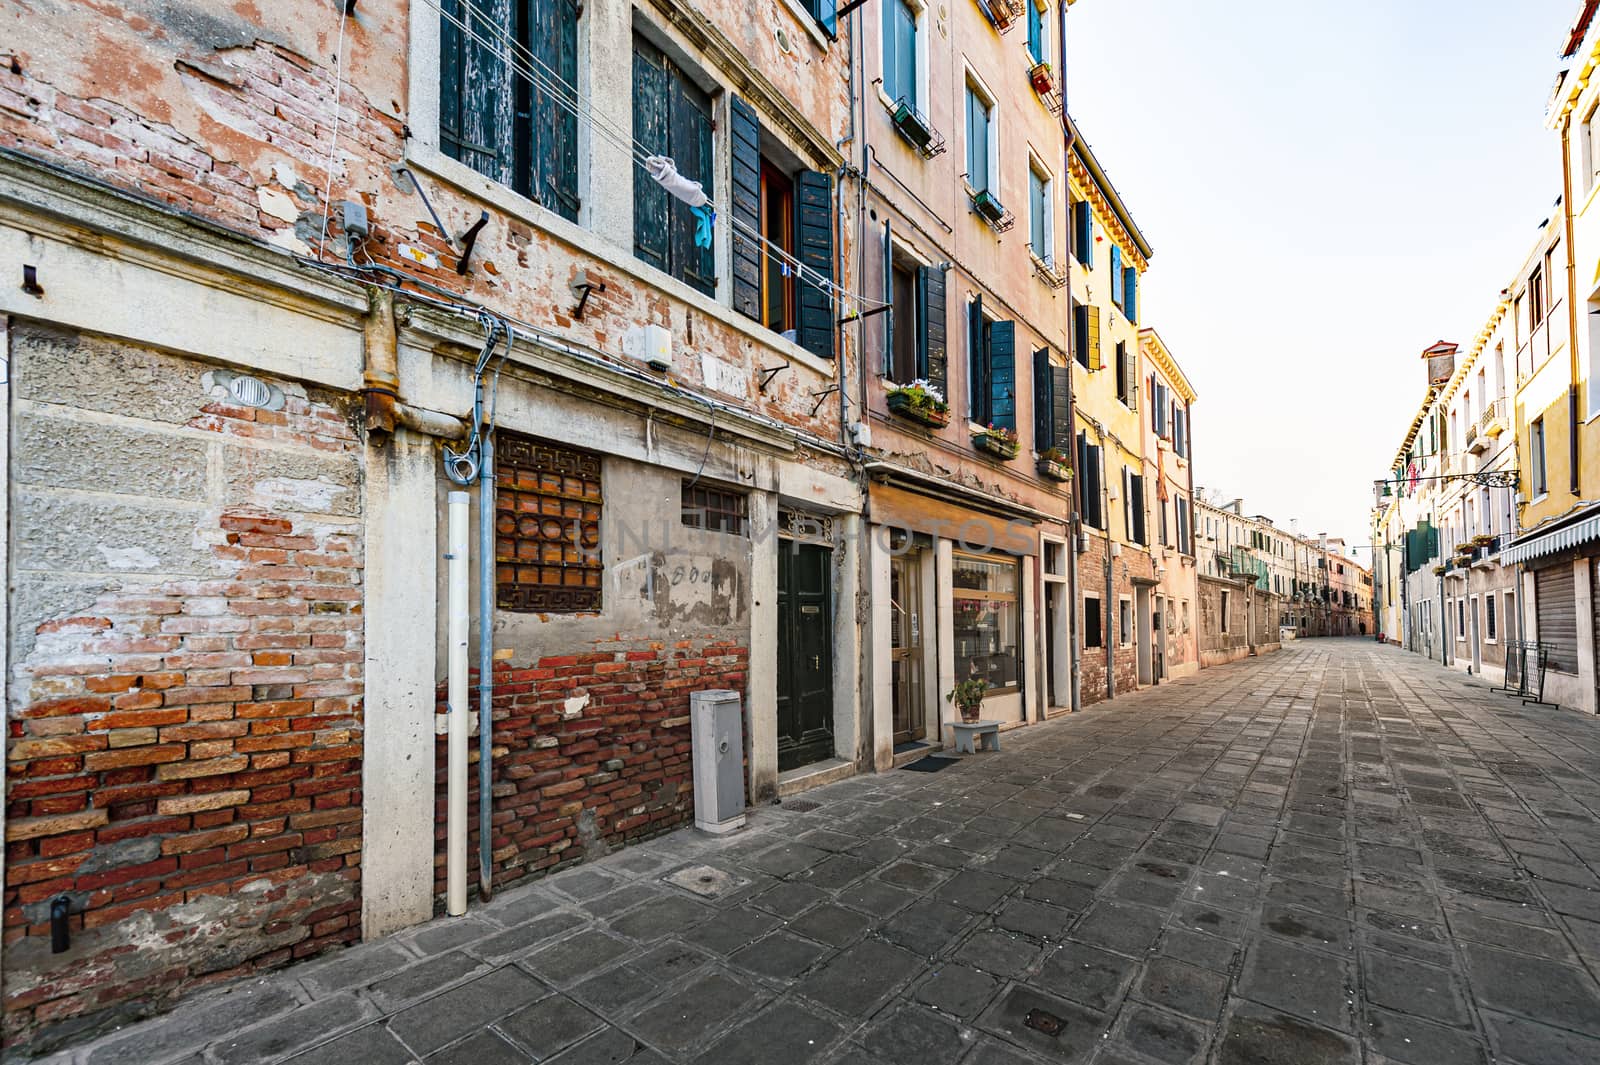 Deserted streets of Venice by gkuna